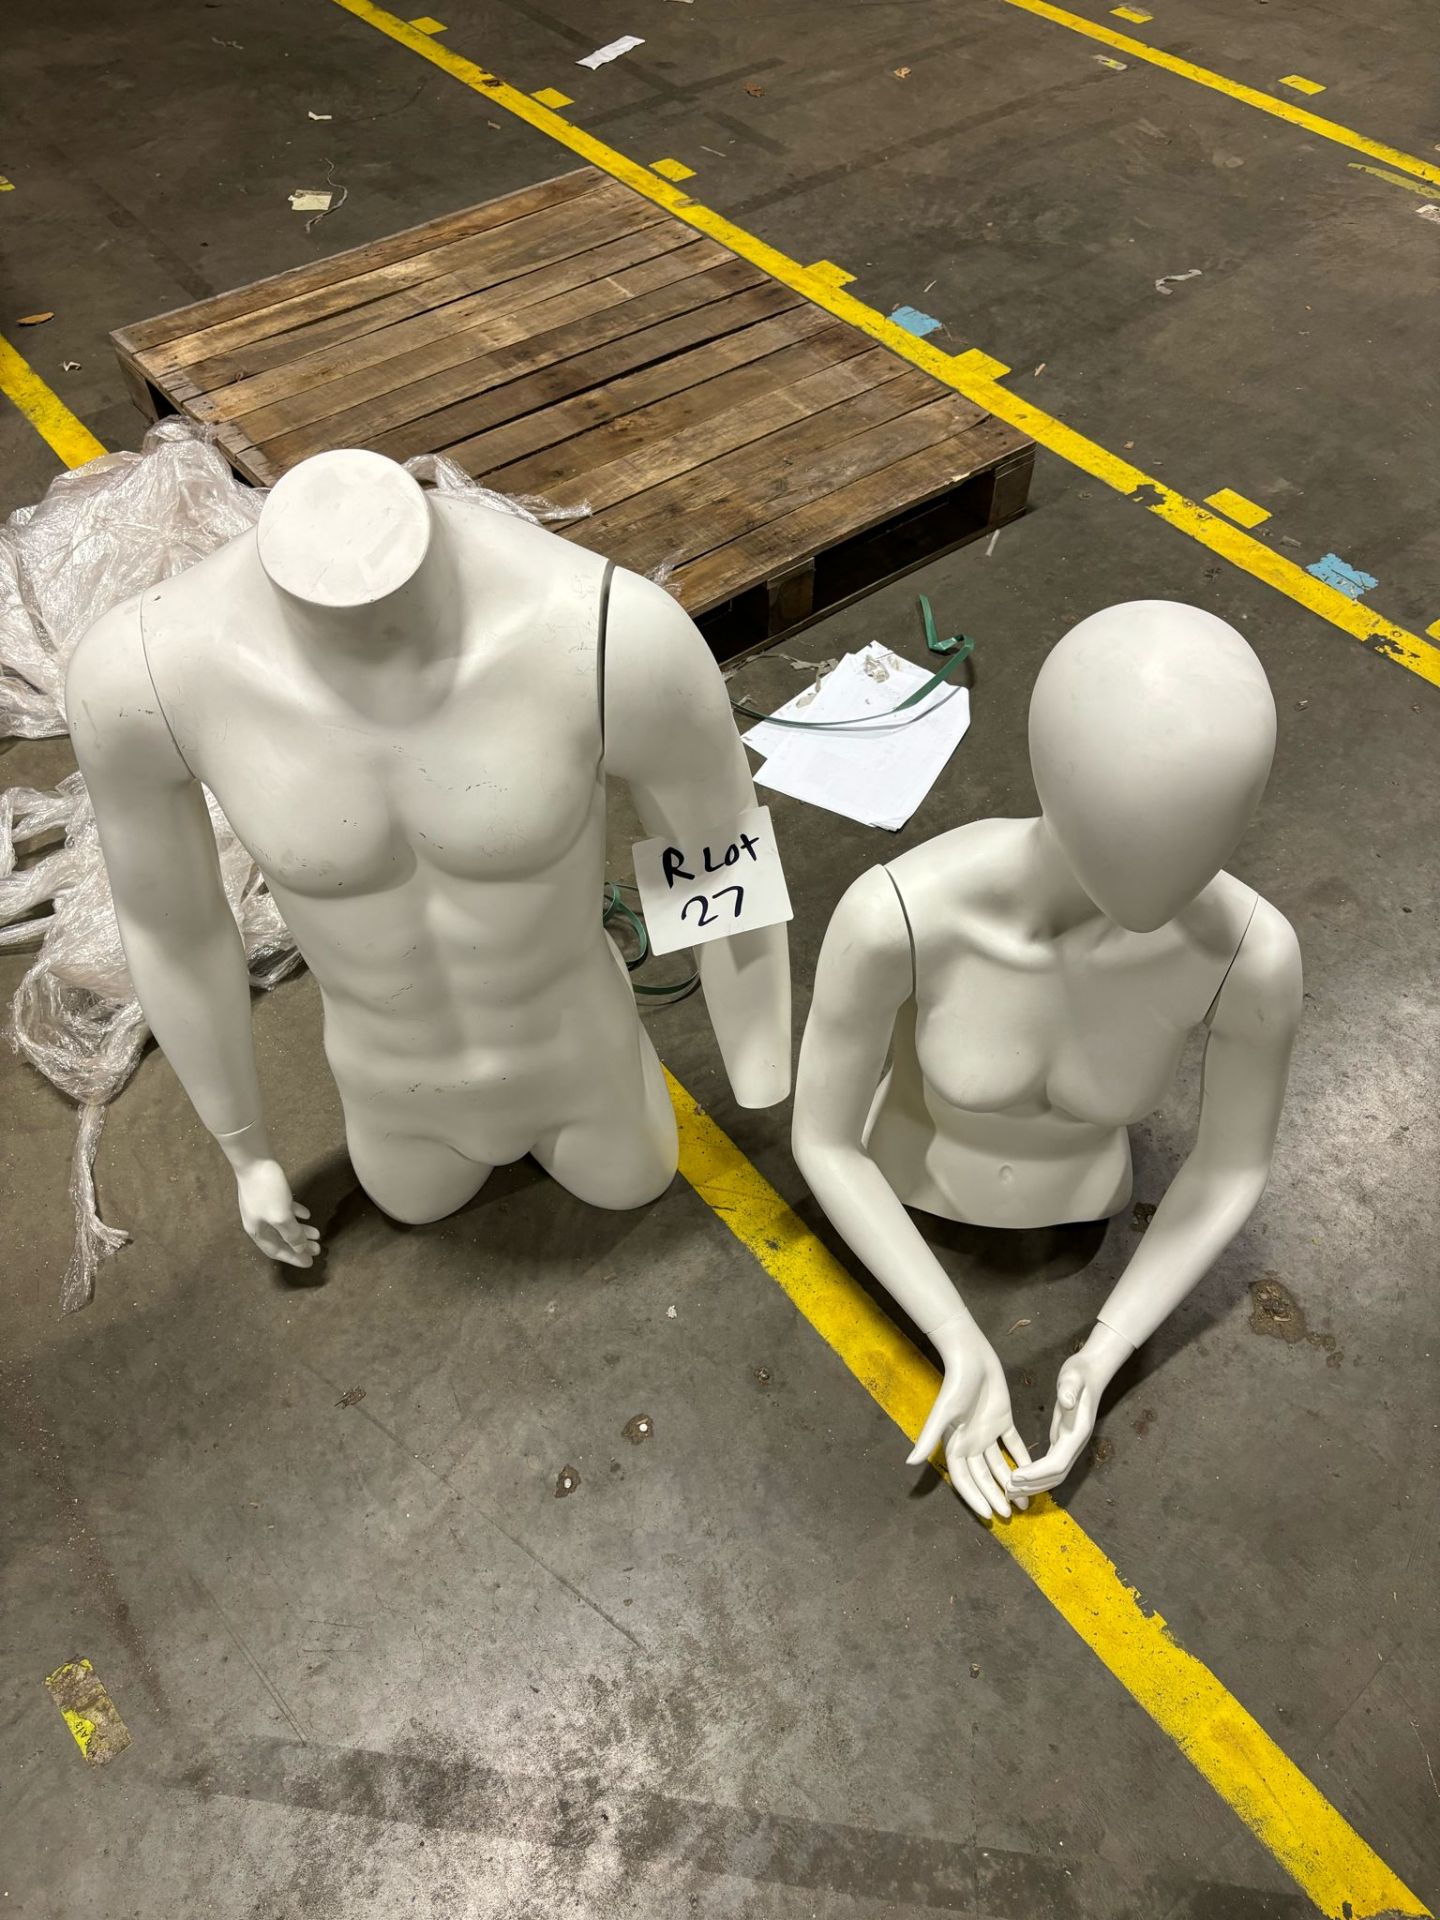 2x MANNEQUINS RETAIL SHOP DISPLAY ADULT MALE FEMALE STANDING MANNEQUIN TAILORS DUMMIES